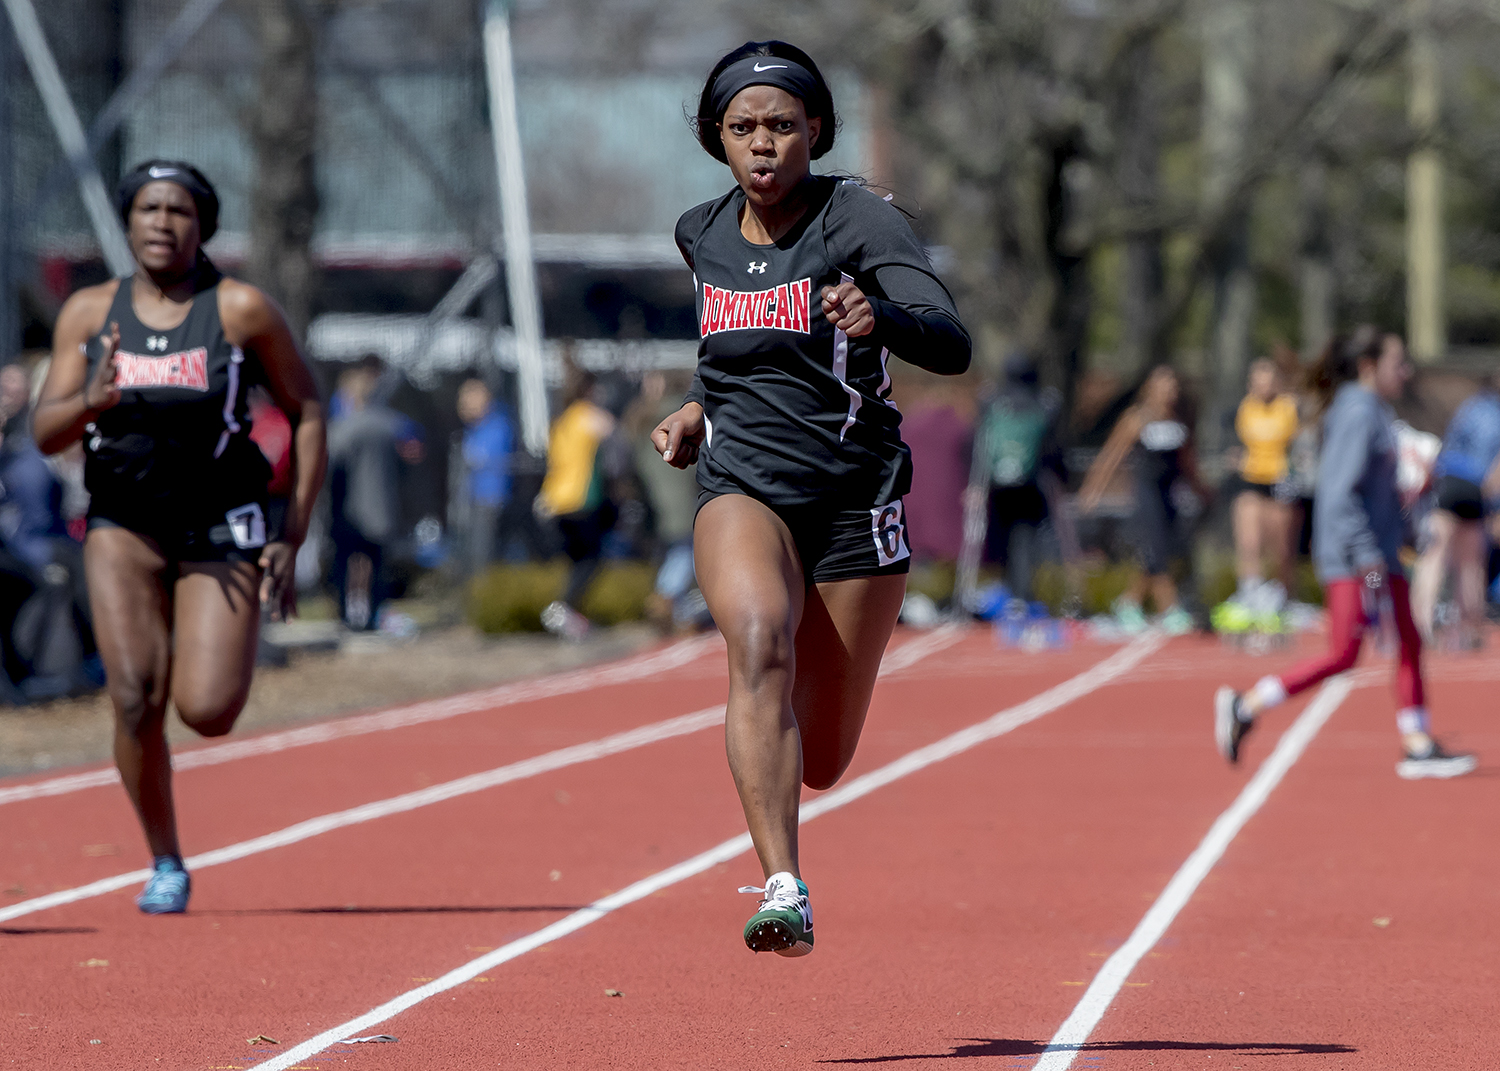 WOMEN'S TRACK AND FIELD HEAD TO PRINCETON INVITATIONAL